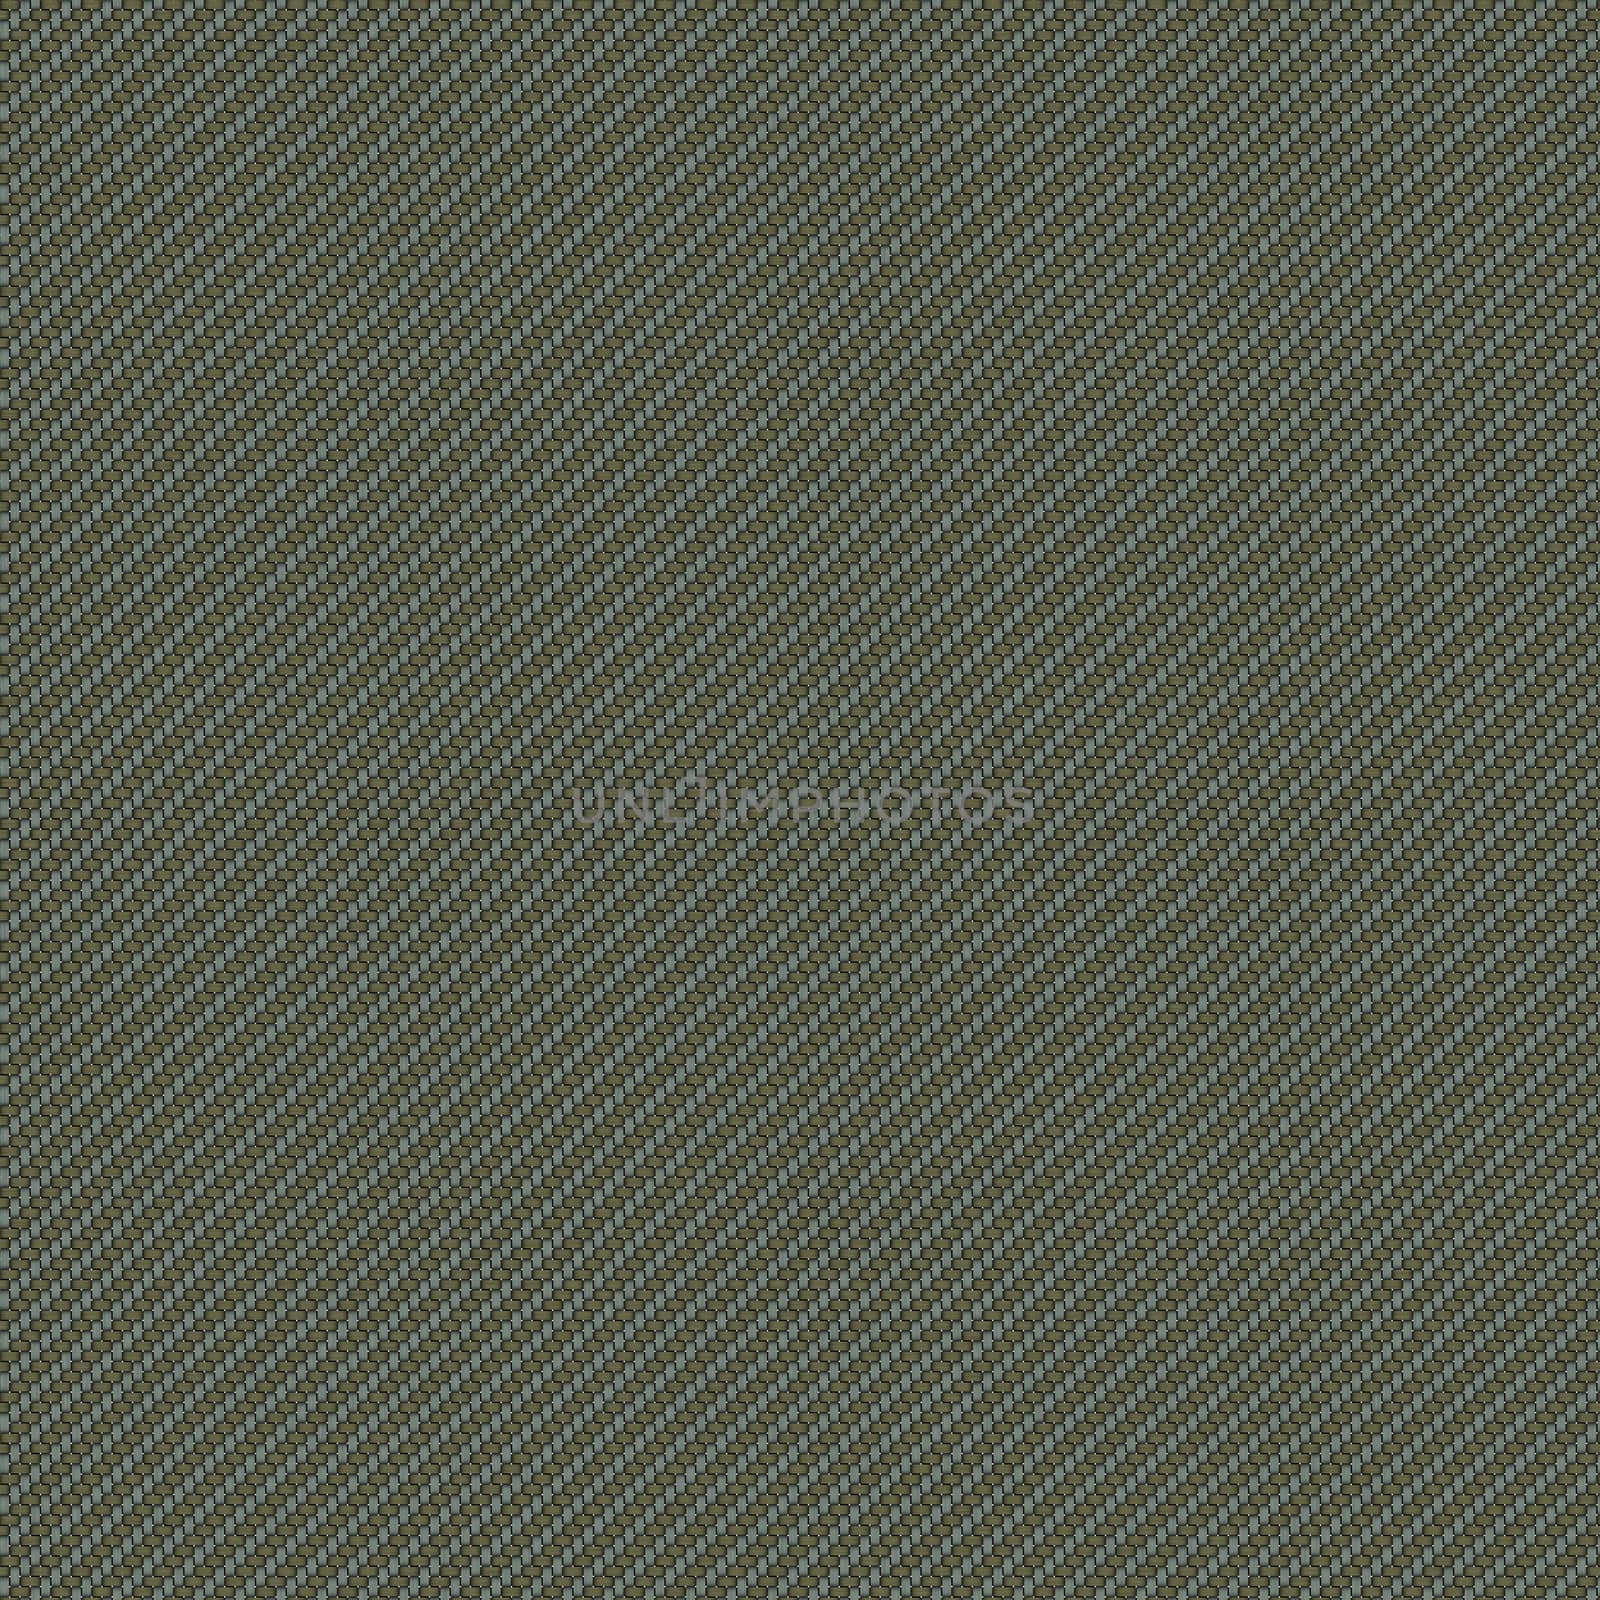 knitted gray fabric texture